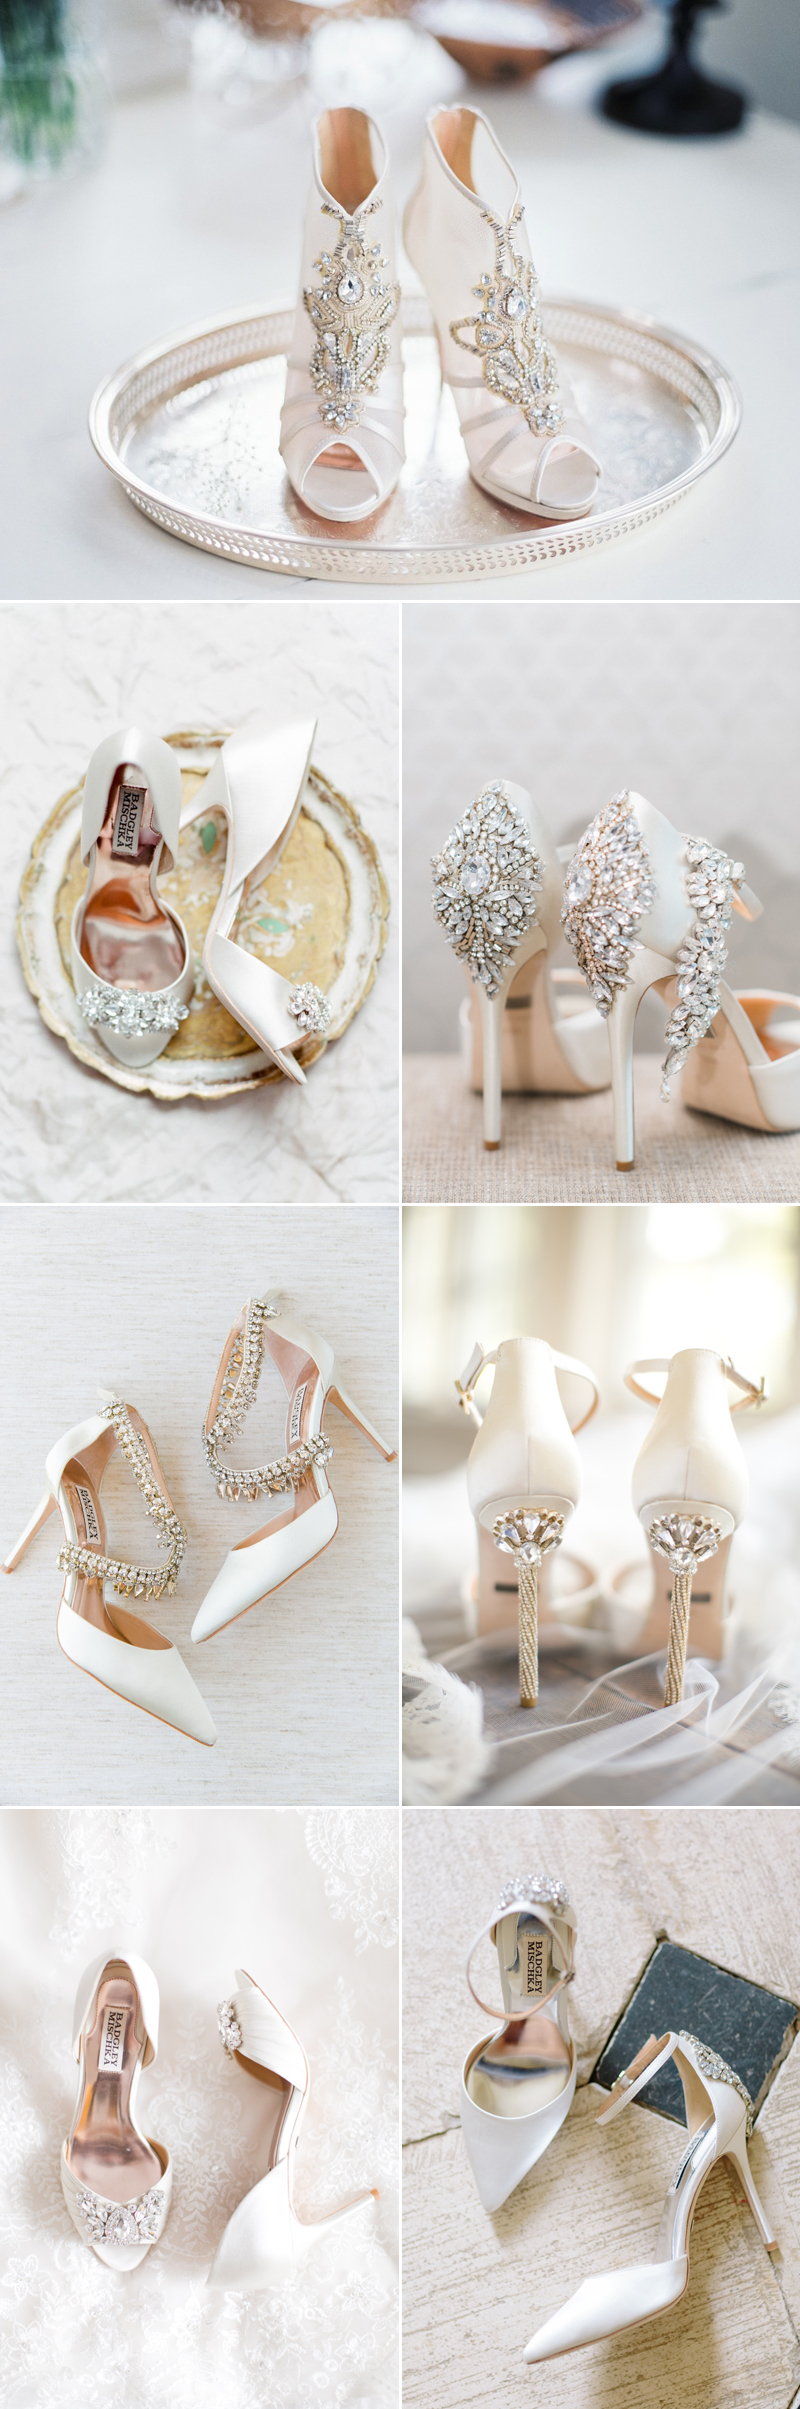 Invalid To seek refuge add to Favorite Wedding Shoes For Every Budget and Bride - Badgley Mischka! -  Praise Wedding